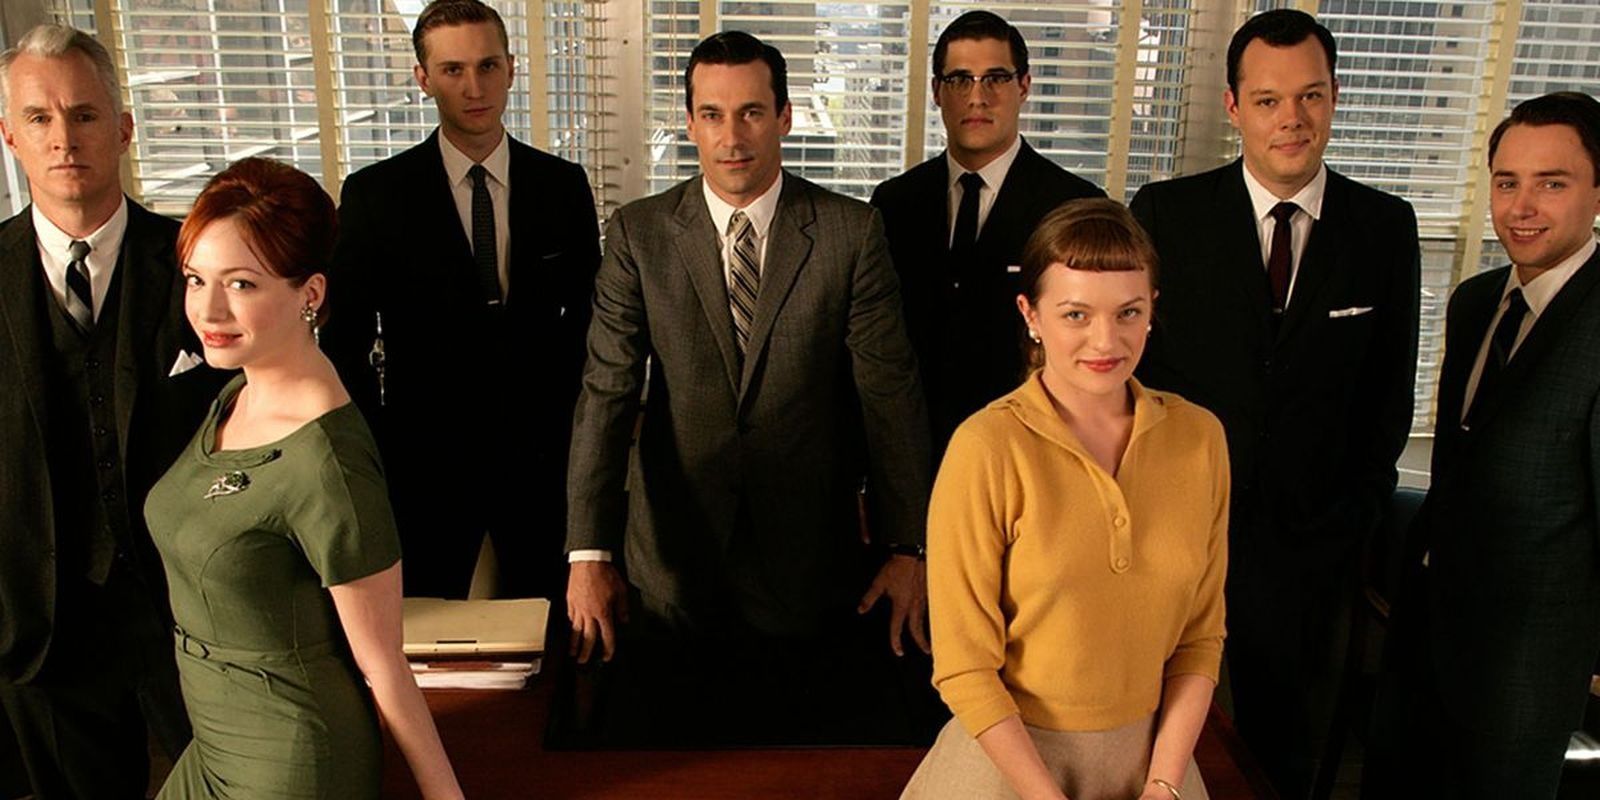 The Mad Men cast standing together